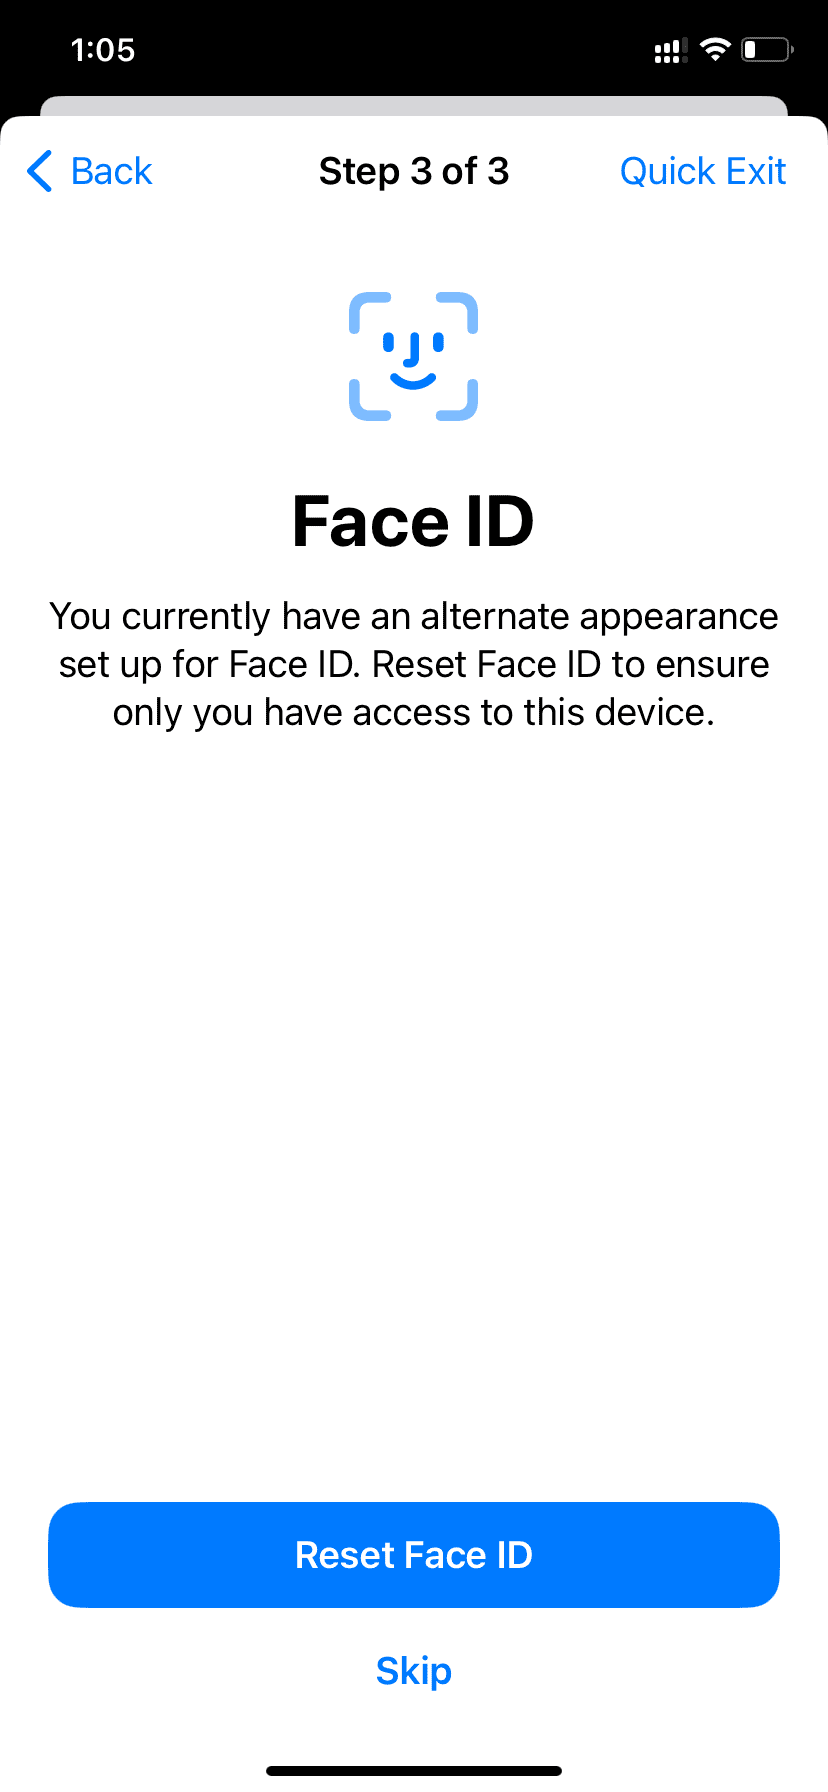 Reset Face ID to prevent other from getting inside your iPhone